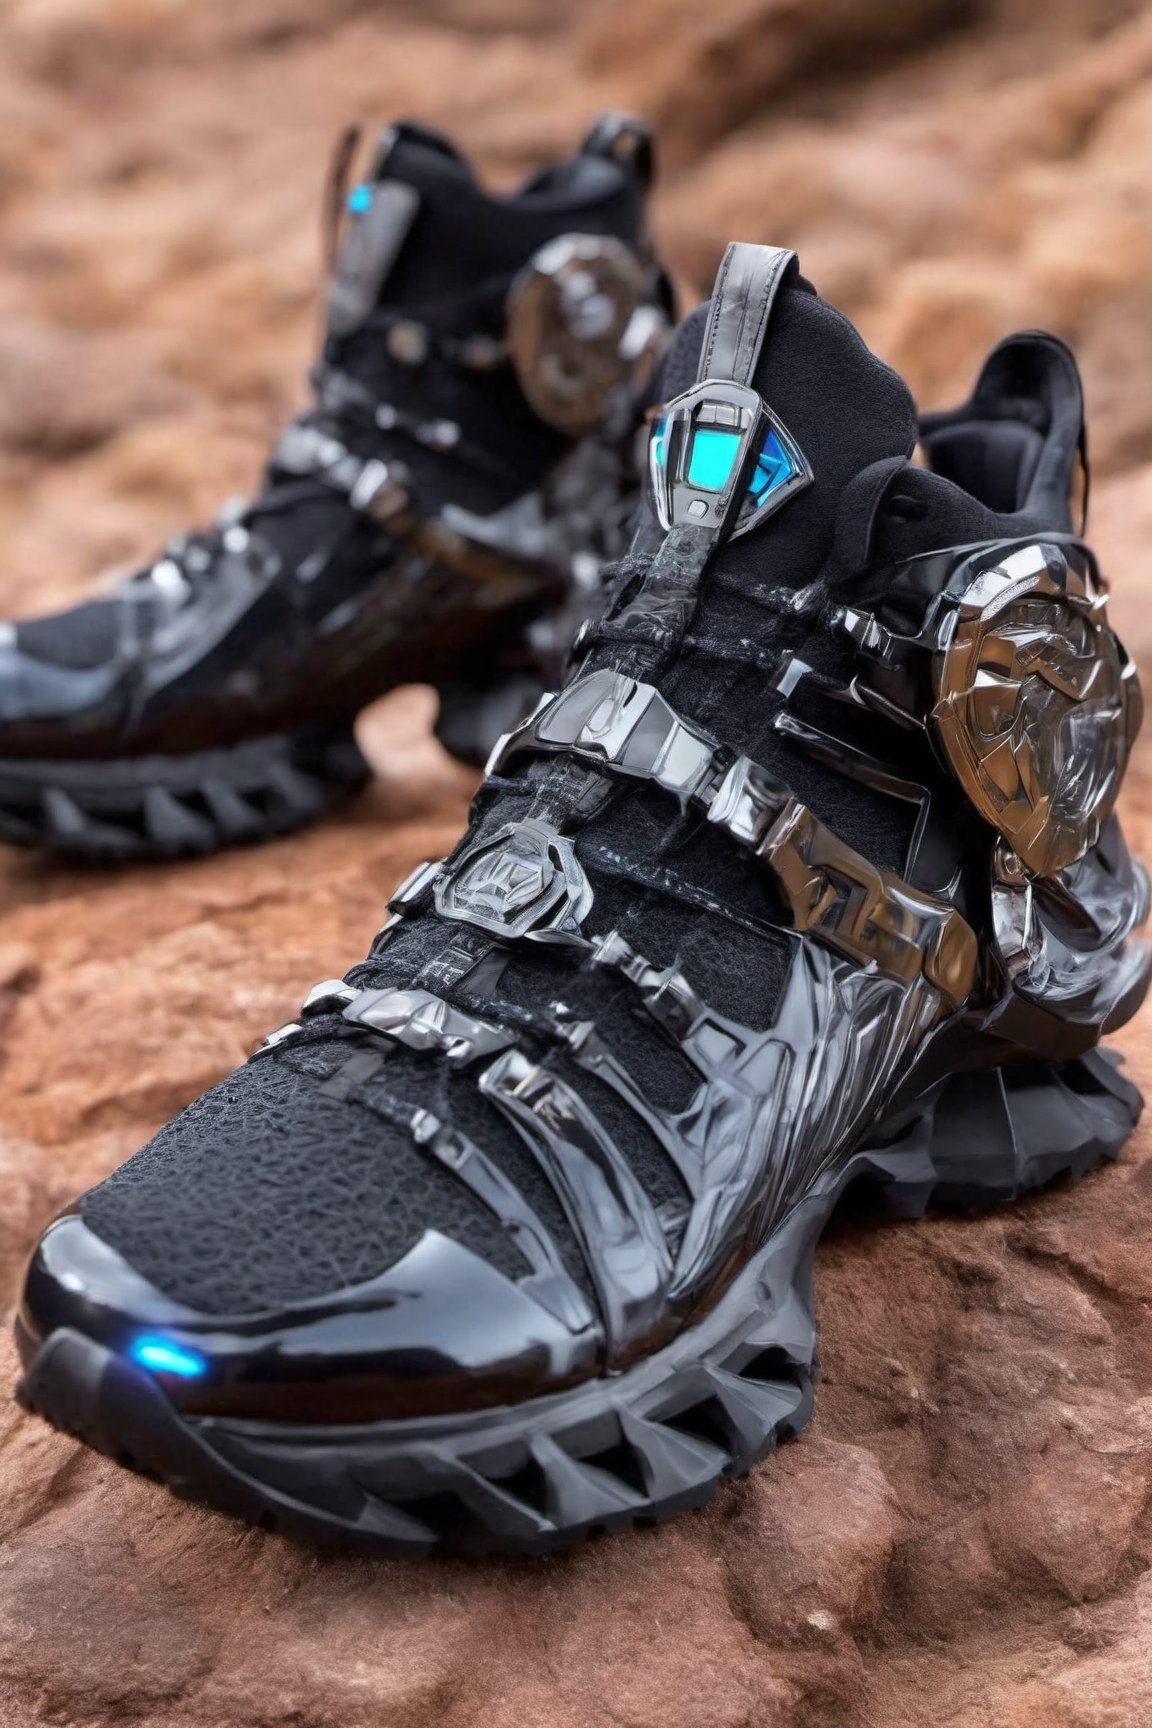 futuristic crypto black panther shoes , Hiking shoes inspire by black panther design, Salomon brand, high_resolution, high detail, realistic, realism,cyborg style,Colourful cat ,steampunk style